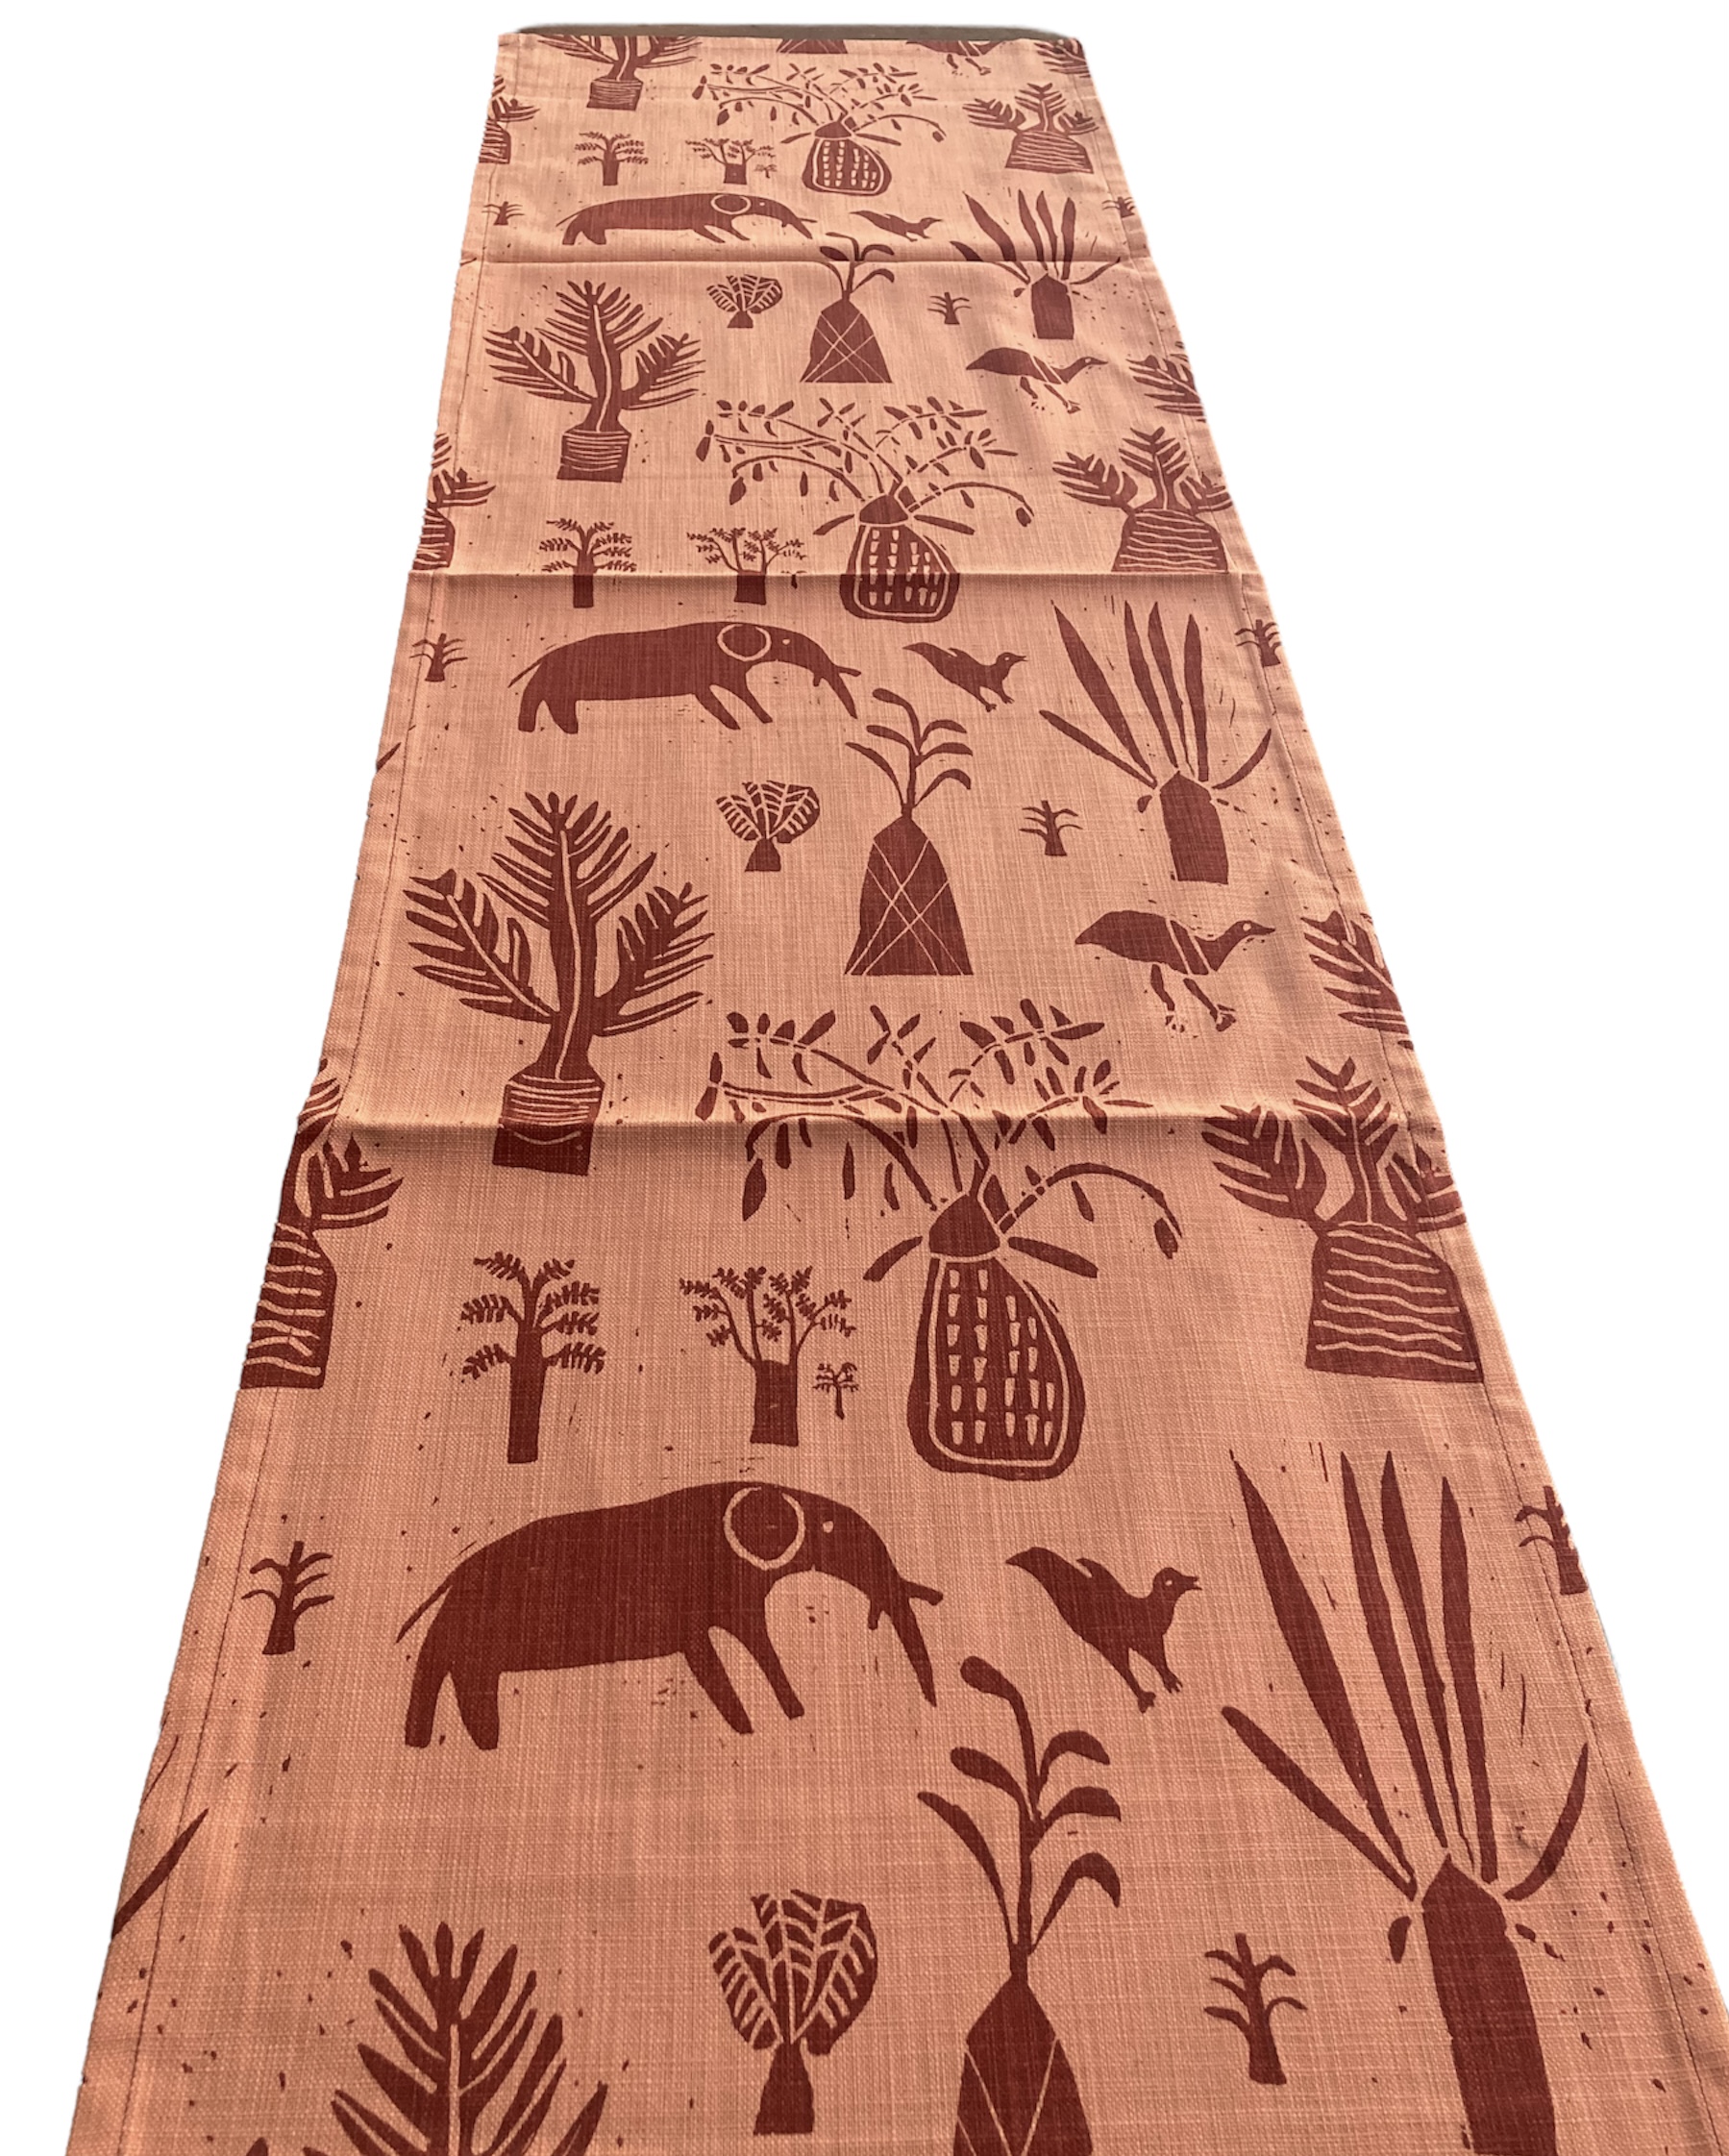 100% cotton Table Runner 58\" x 16\" from Namibia - Design 09s